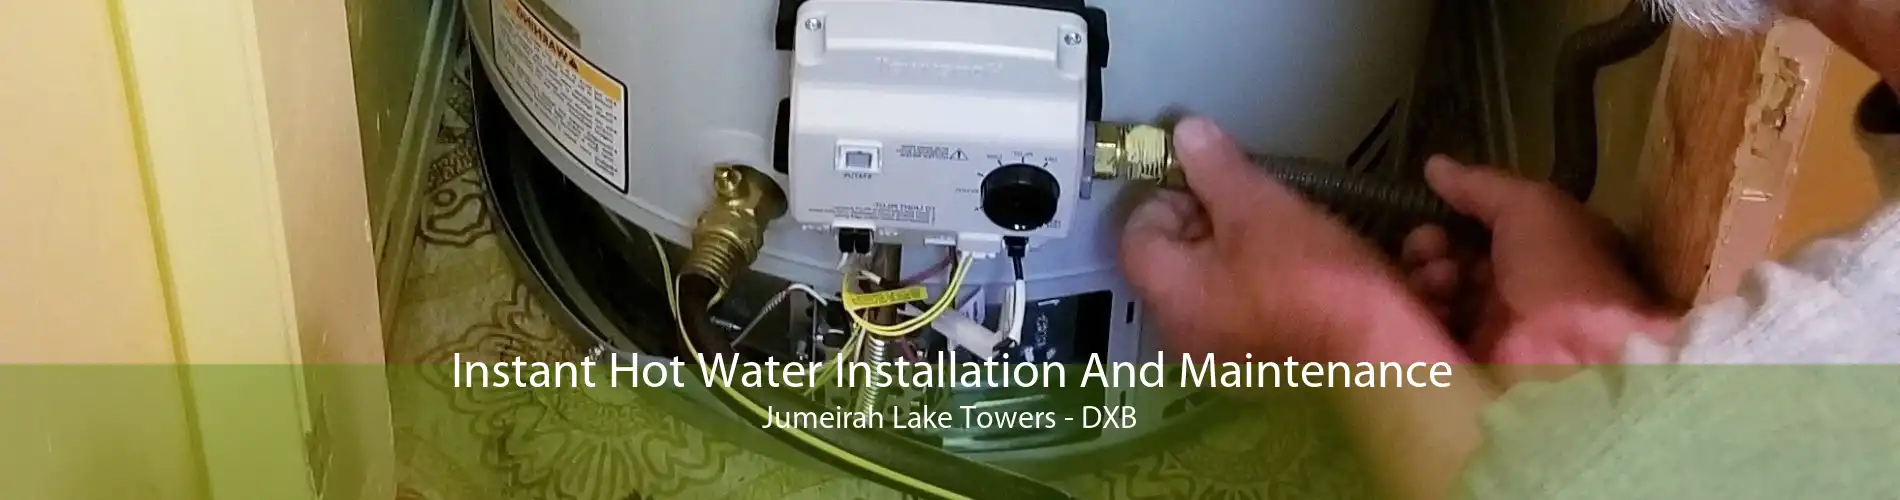 Instant Hot Water Installation And Maintenance Jumeirah Lake Towers - DXB